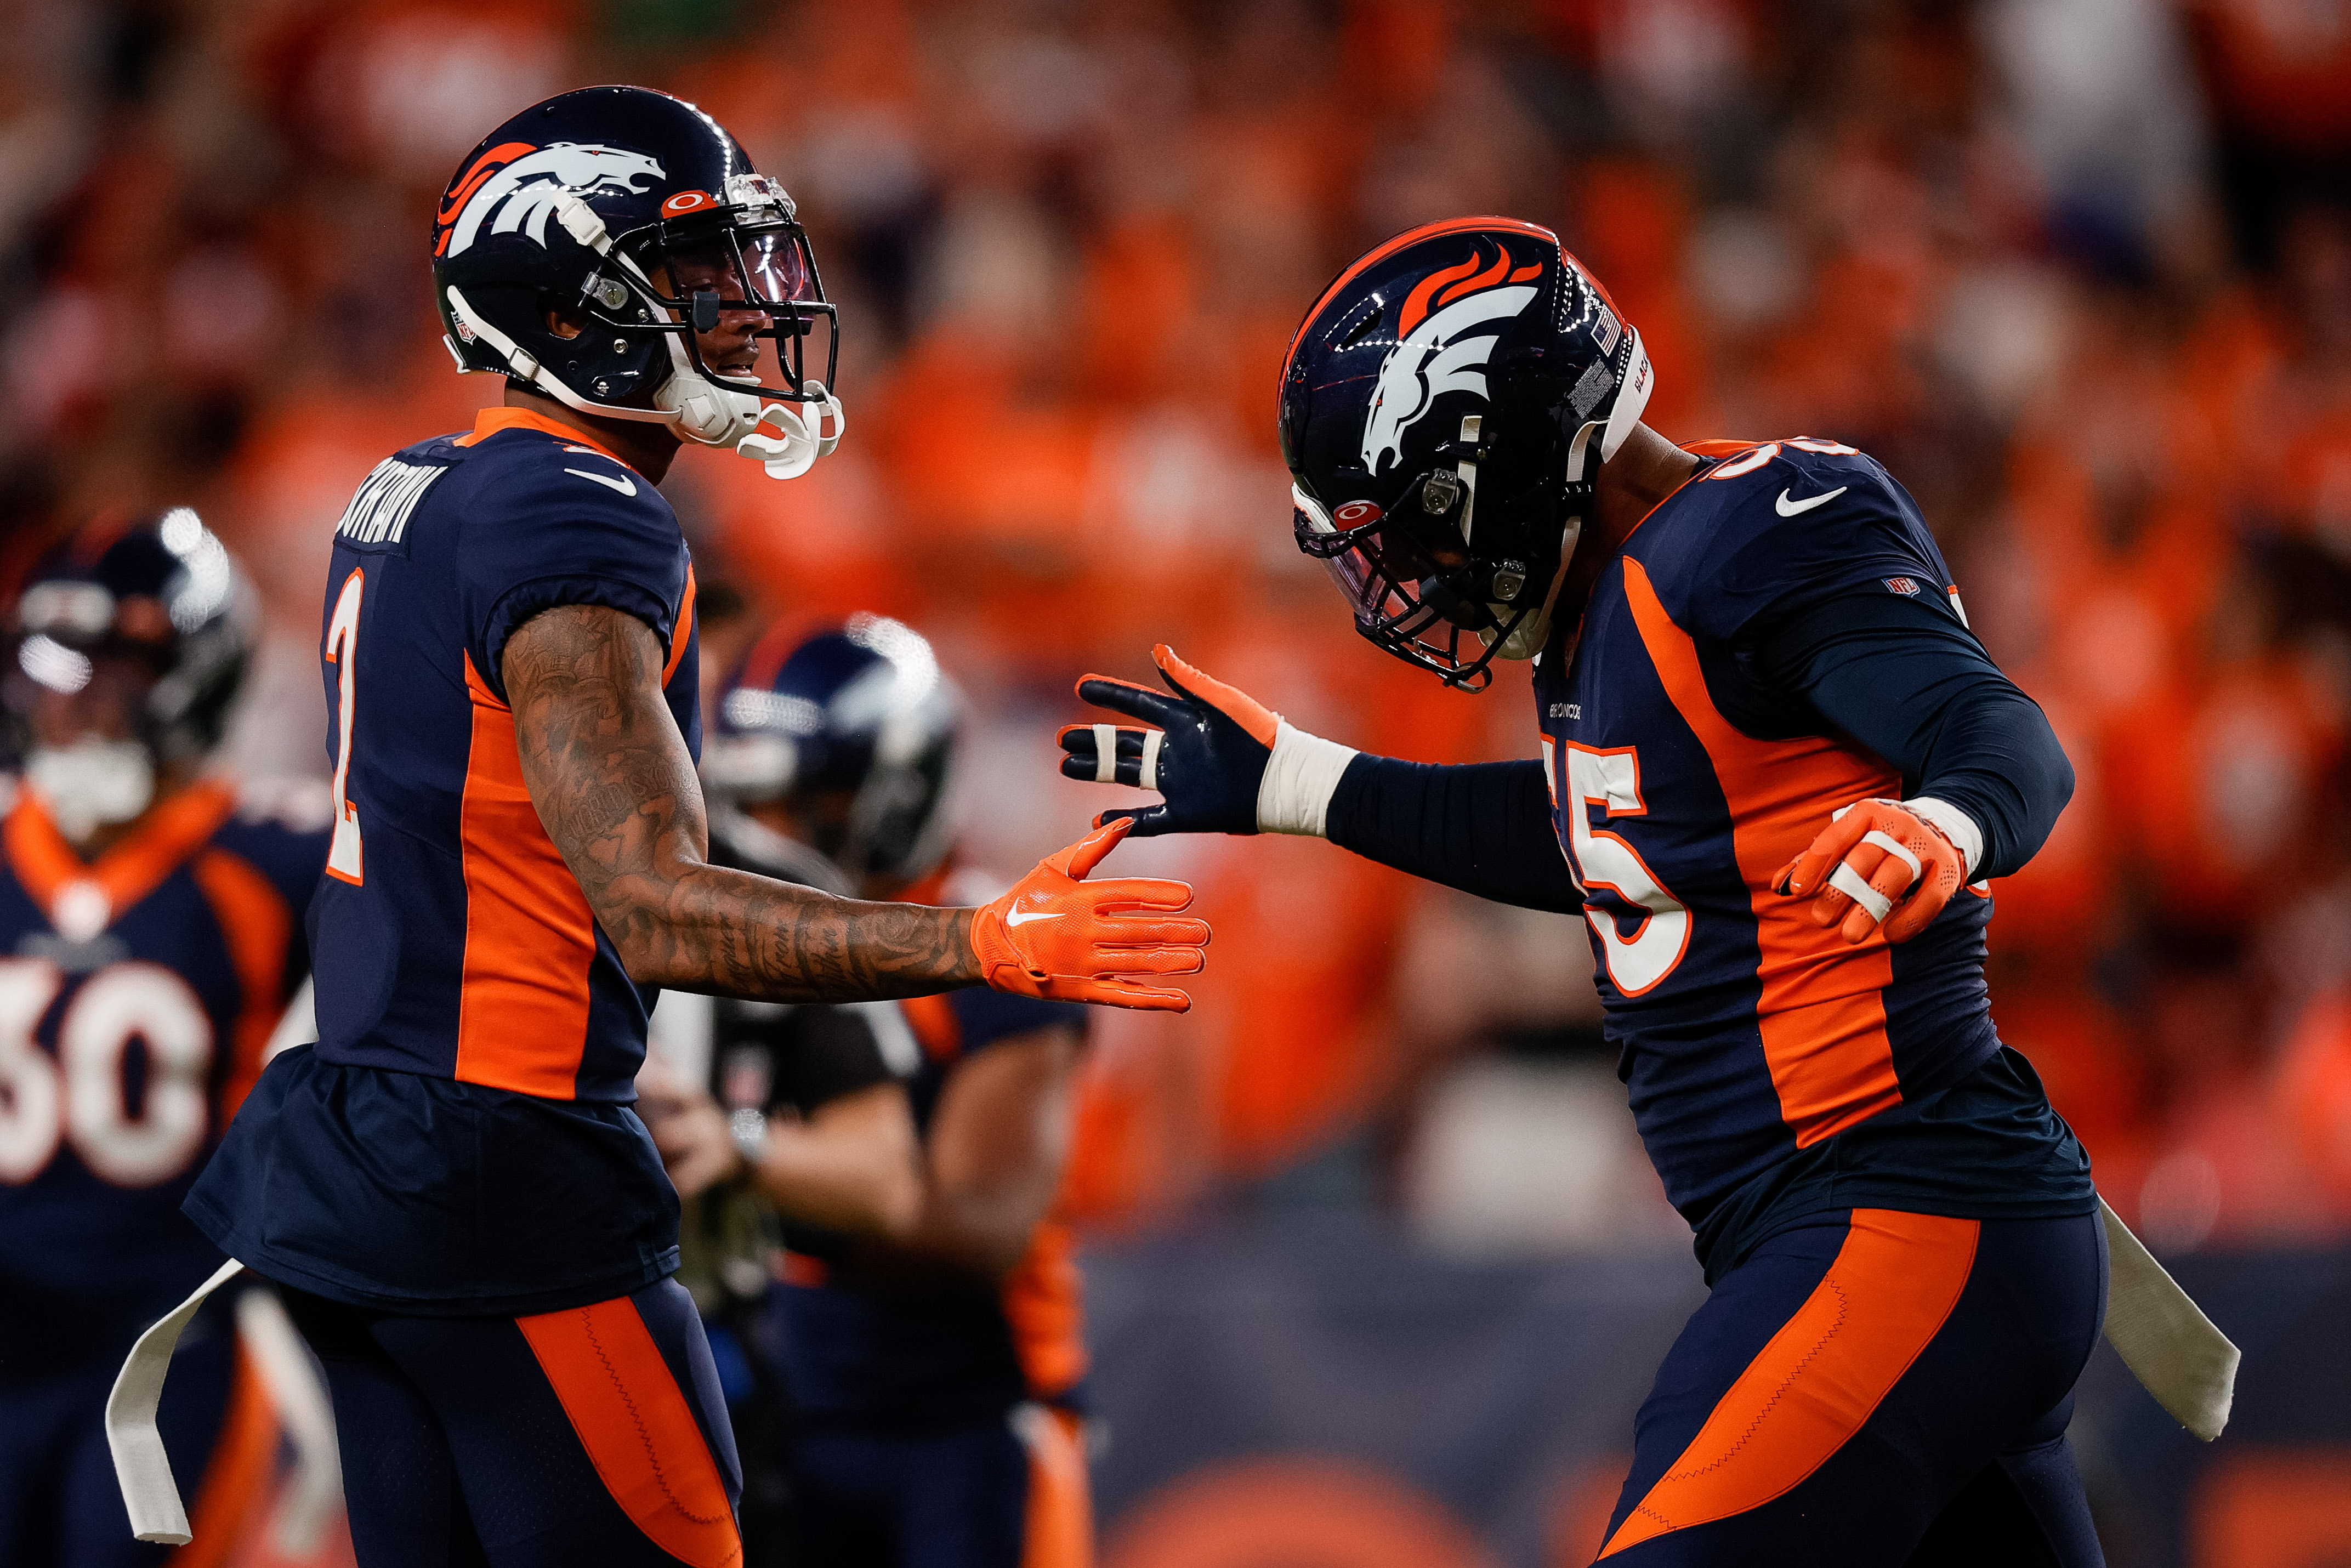 Denver Broncos cornerback Pat Surtain II (2) celebrates with linebacker Bradley Chubb (55) after a play in the first quarter against the San Francisco 49ers at Empower Field at Mile High.